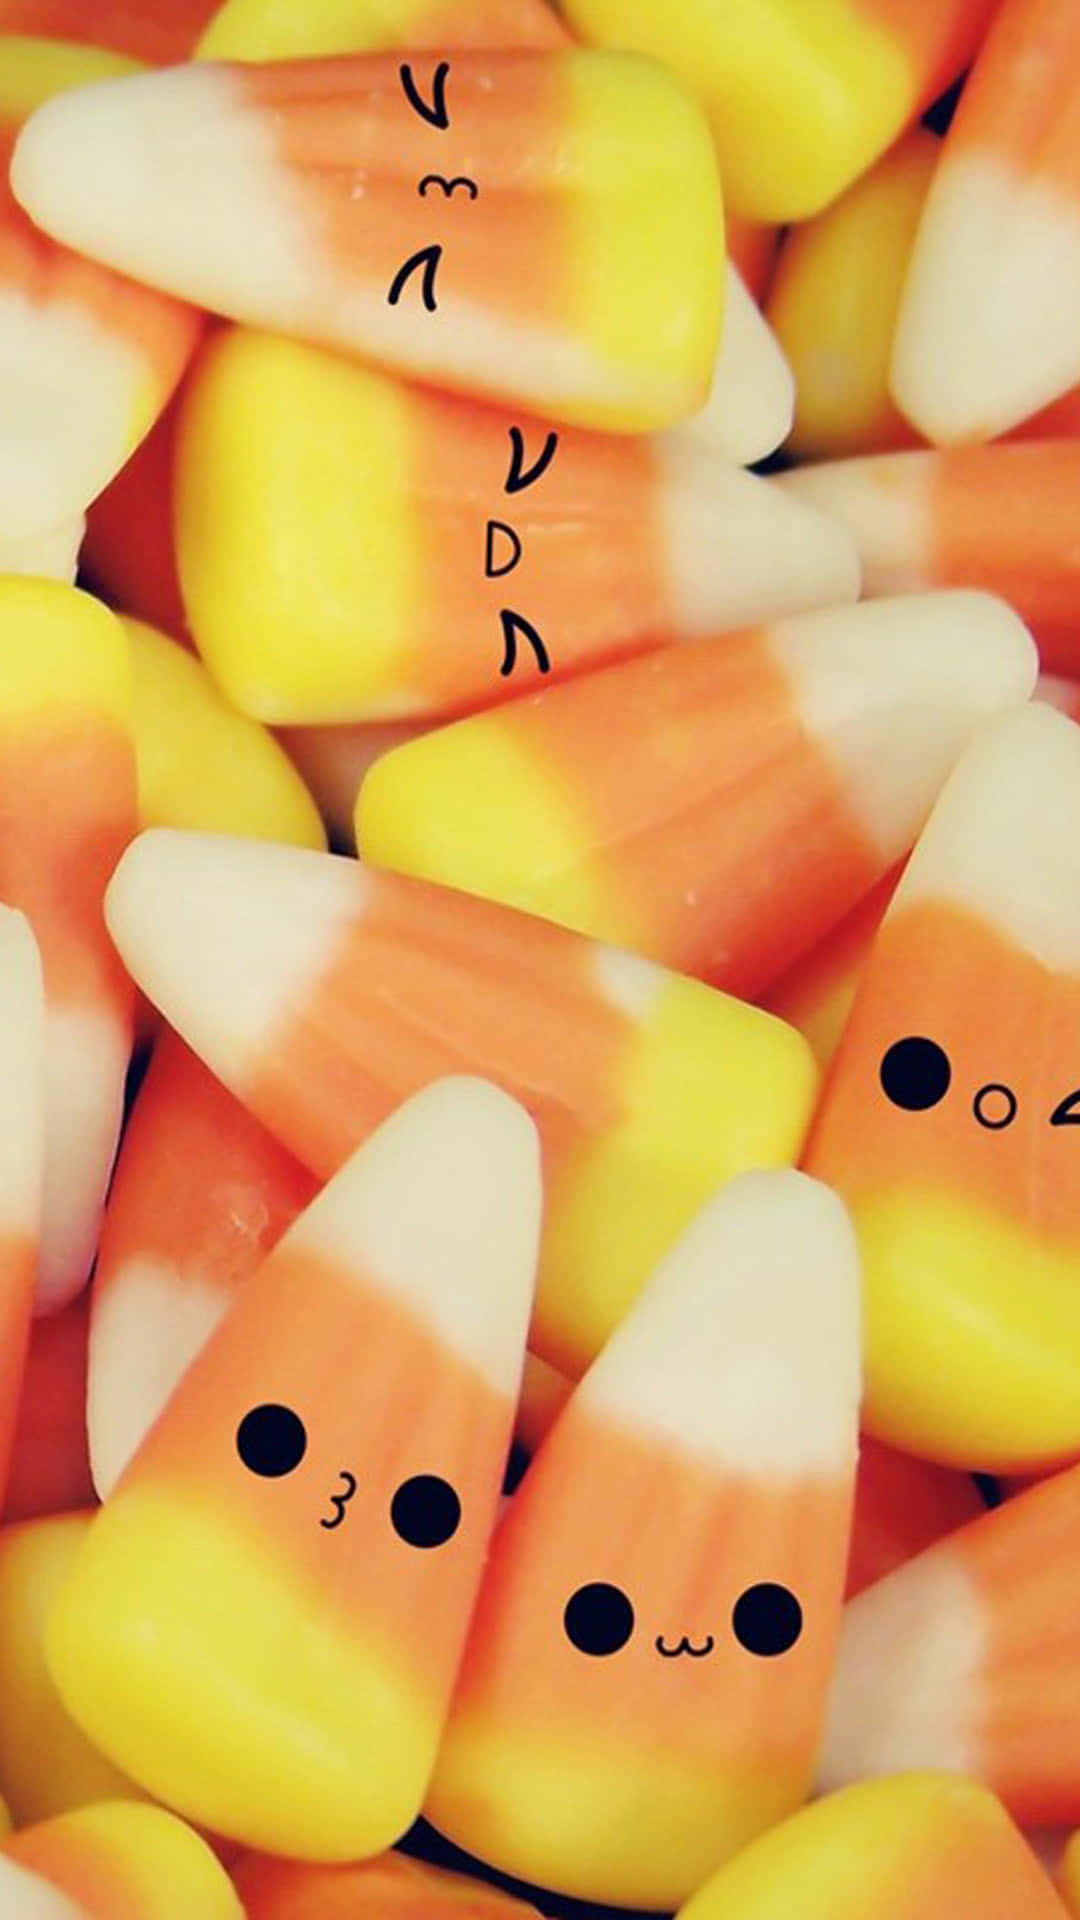 Aesthetic Cute Halloween Candy Popsicles Wallpaper